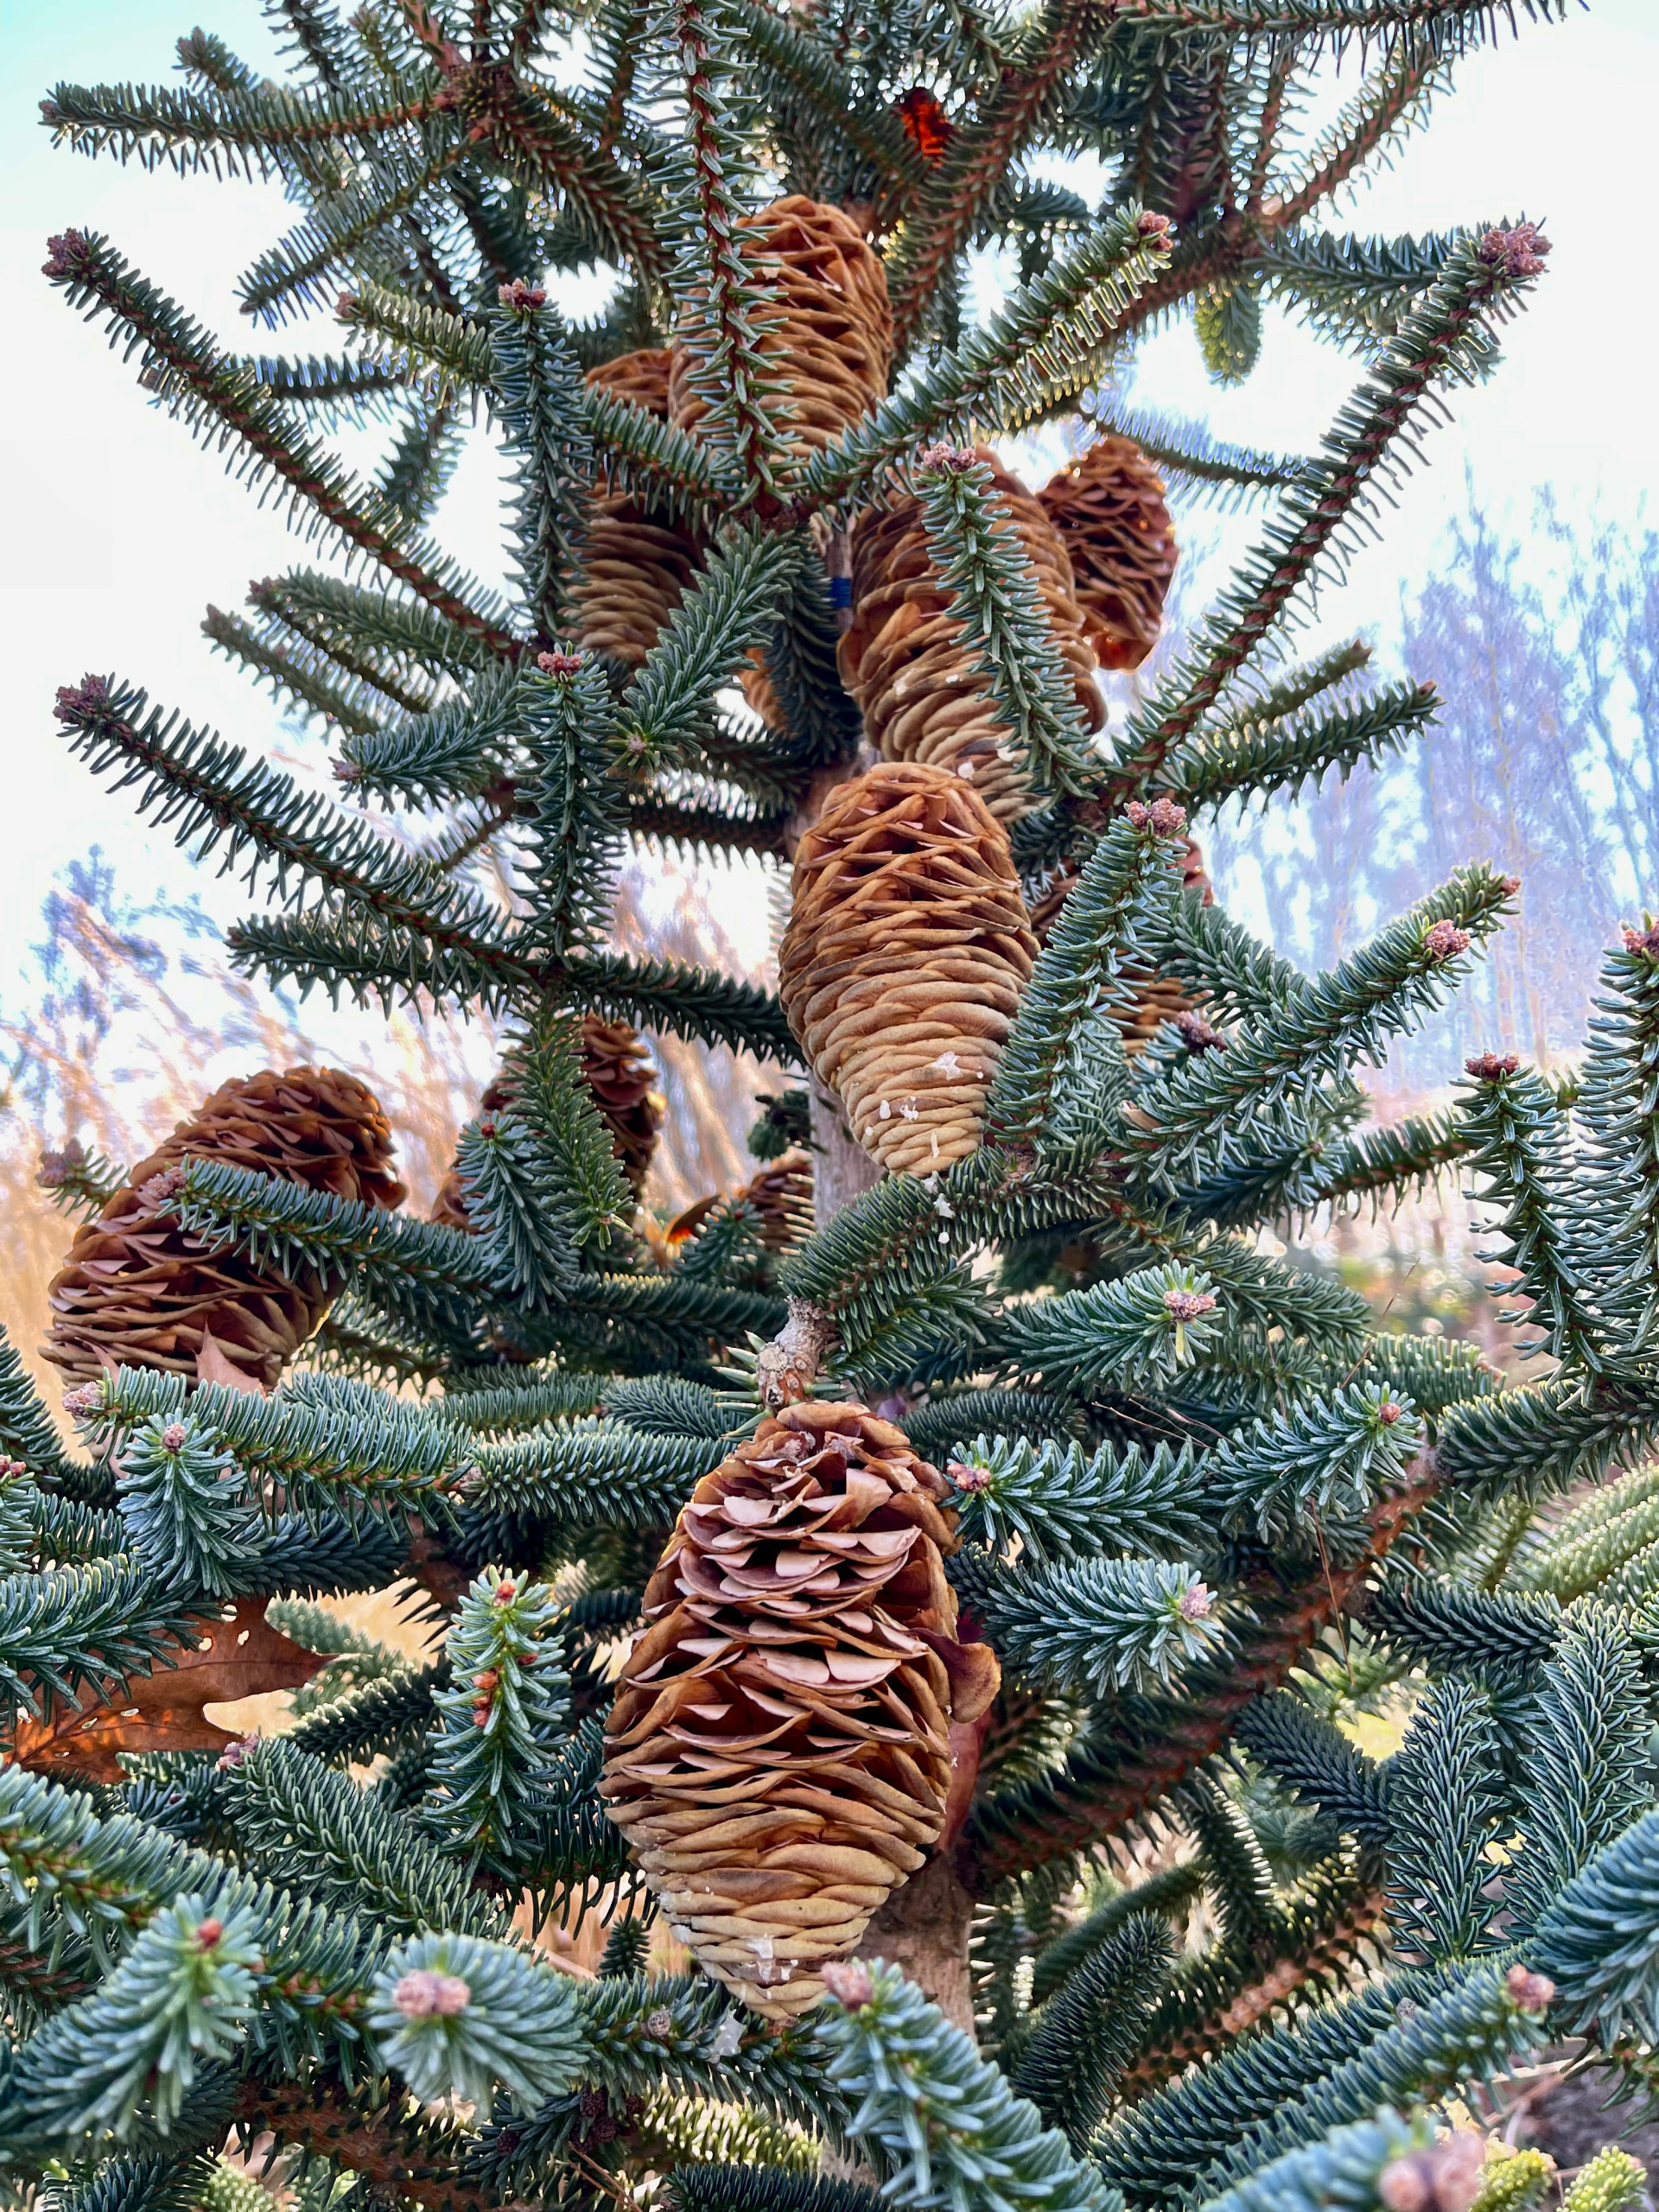 Spanish fir with opening cones